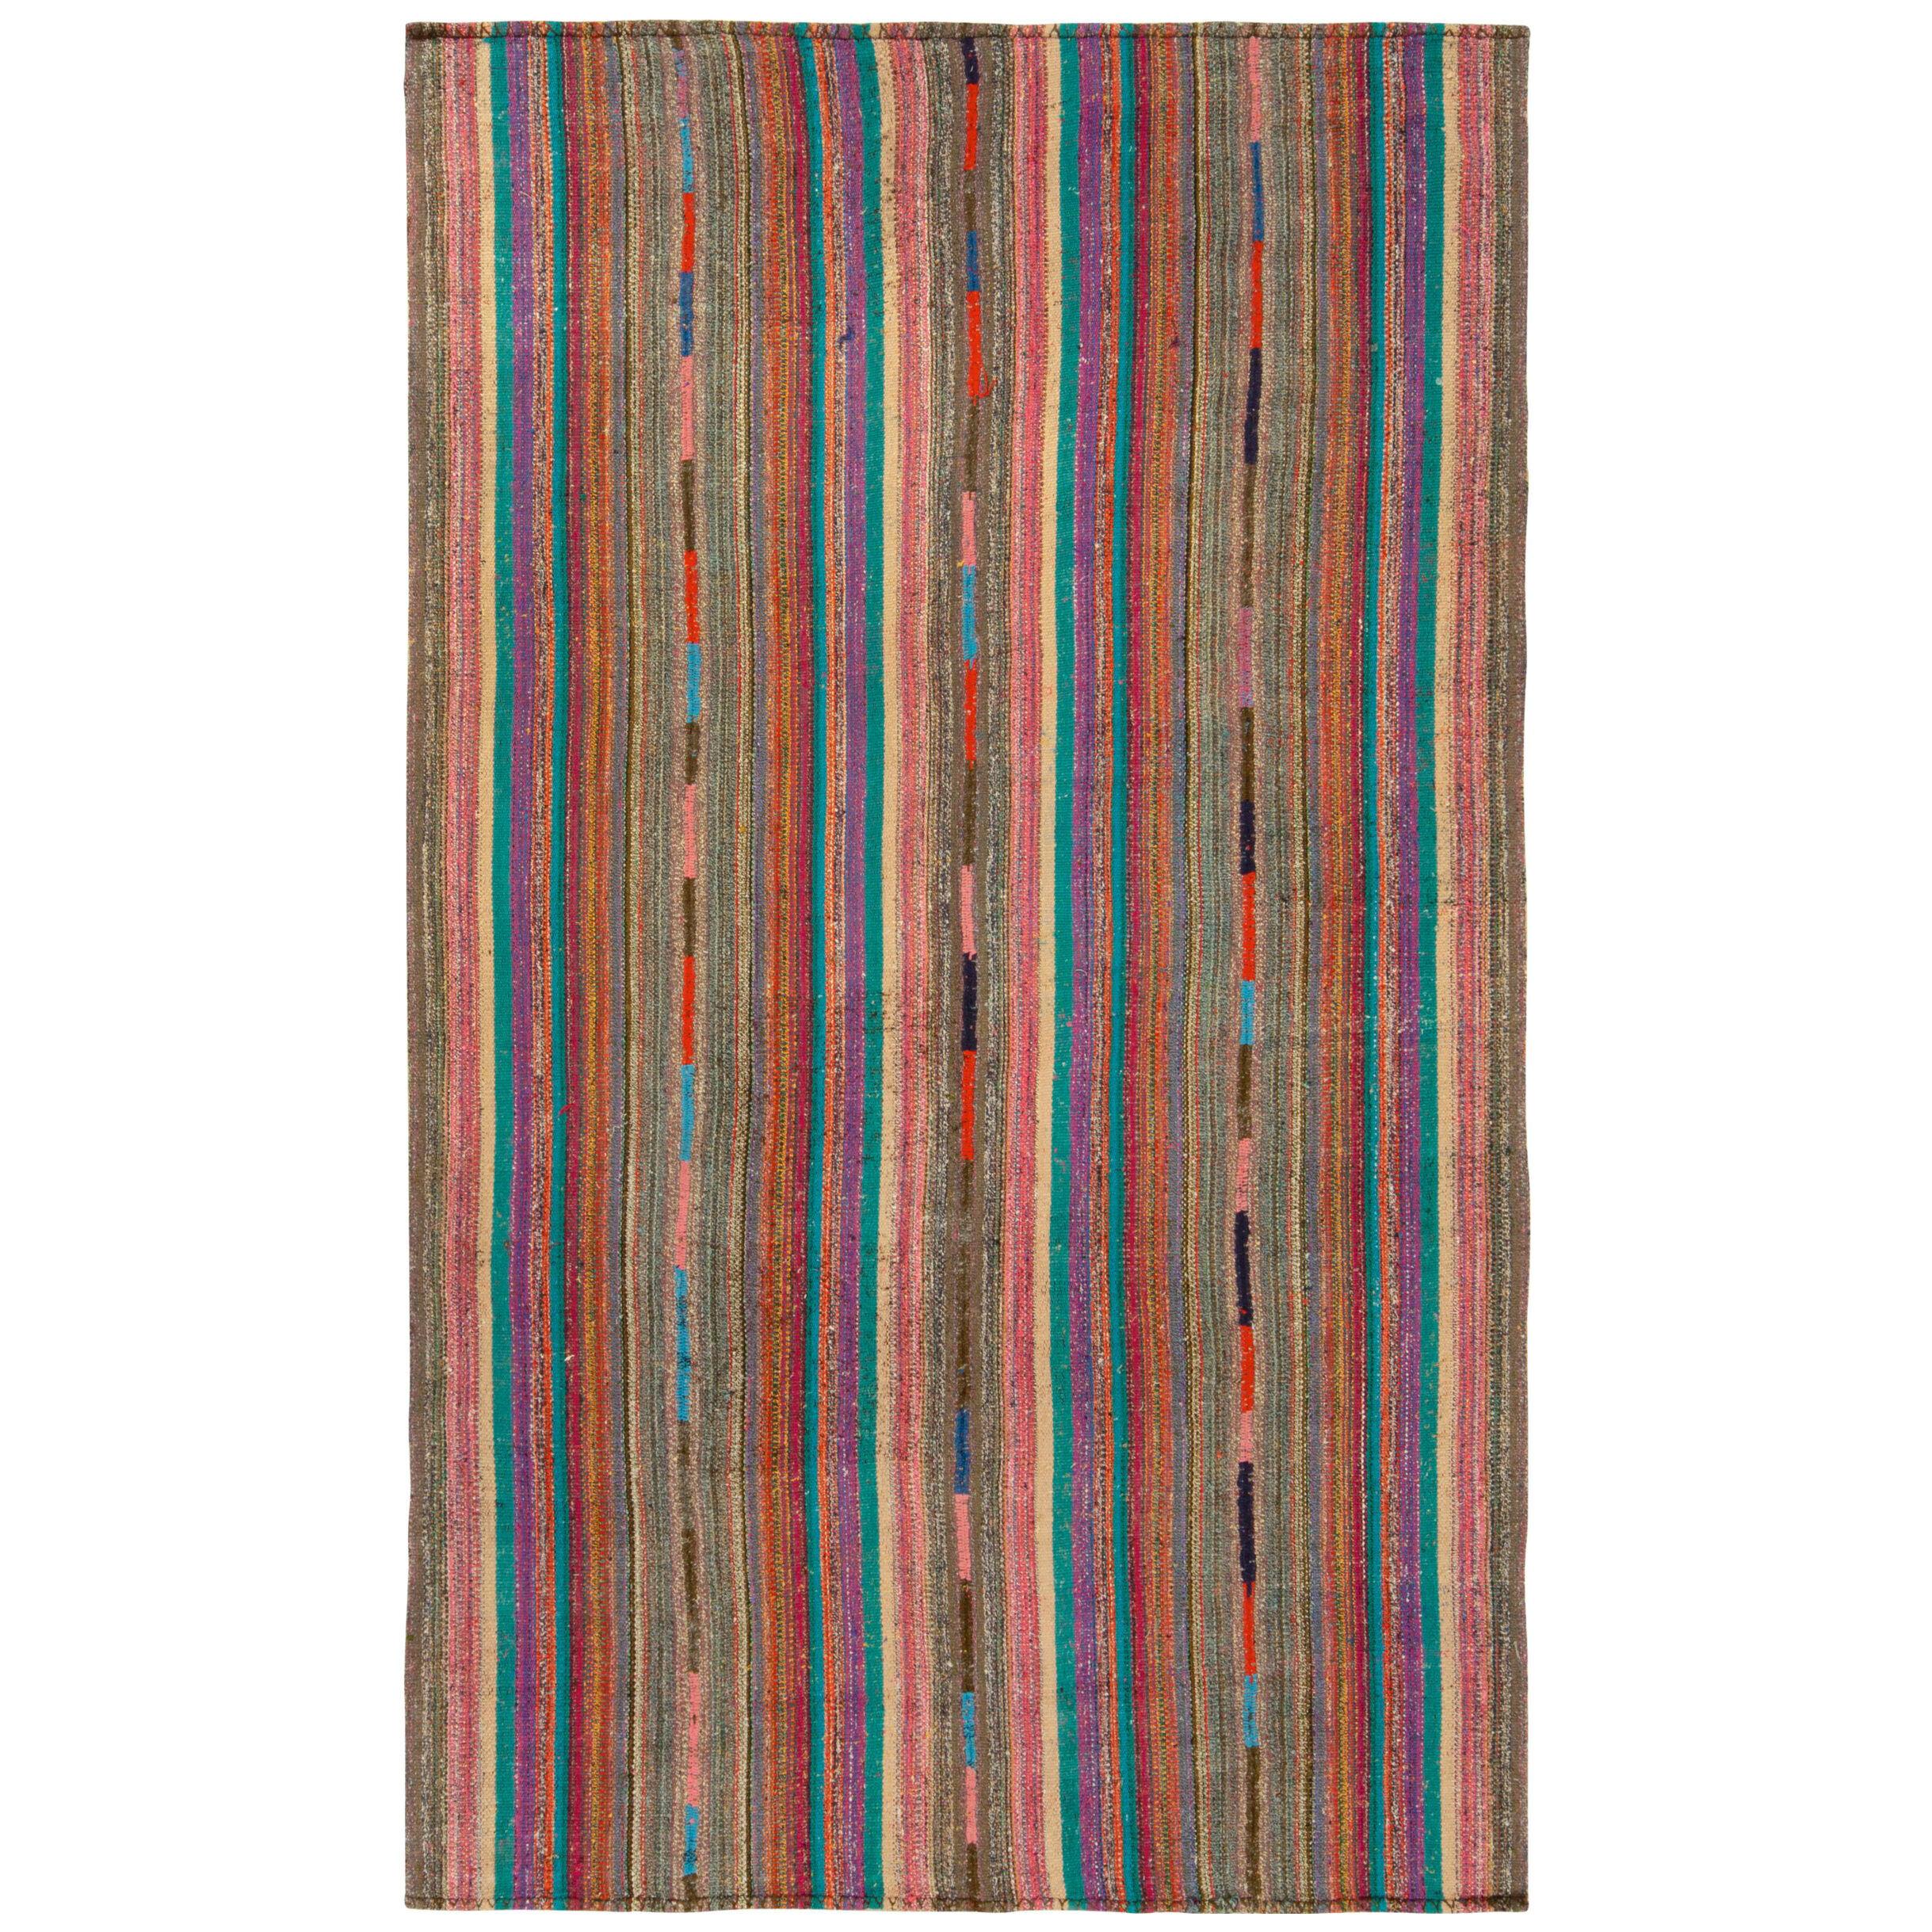 1950S Vintage Chaput Kilim Rug in Multicolor Striped Patterns, Polychromatic